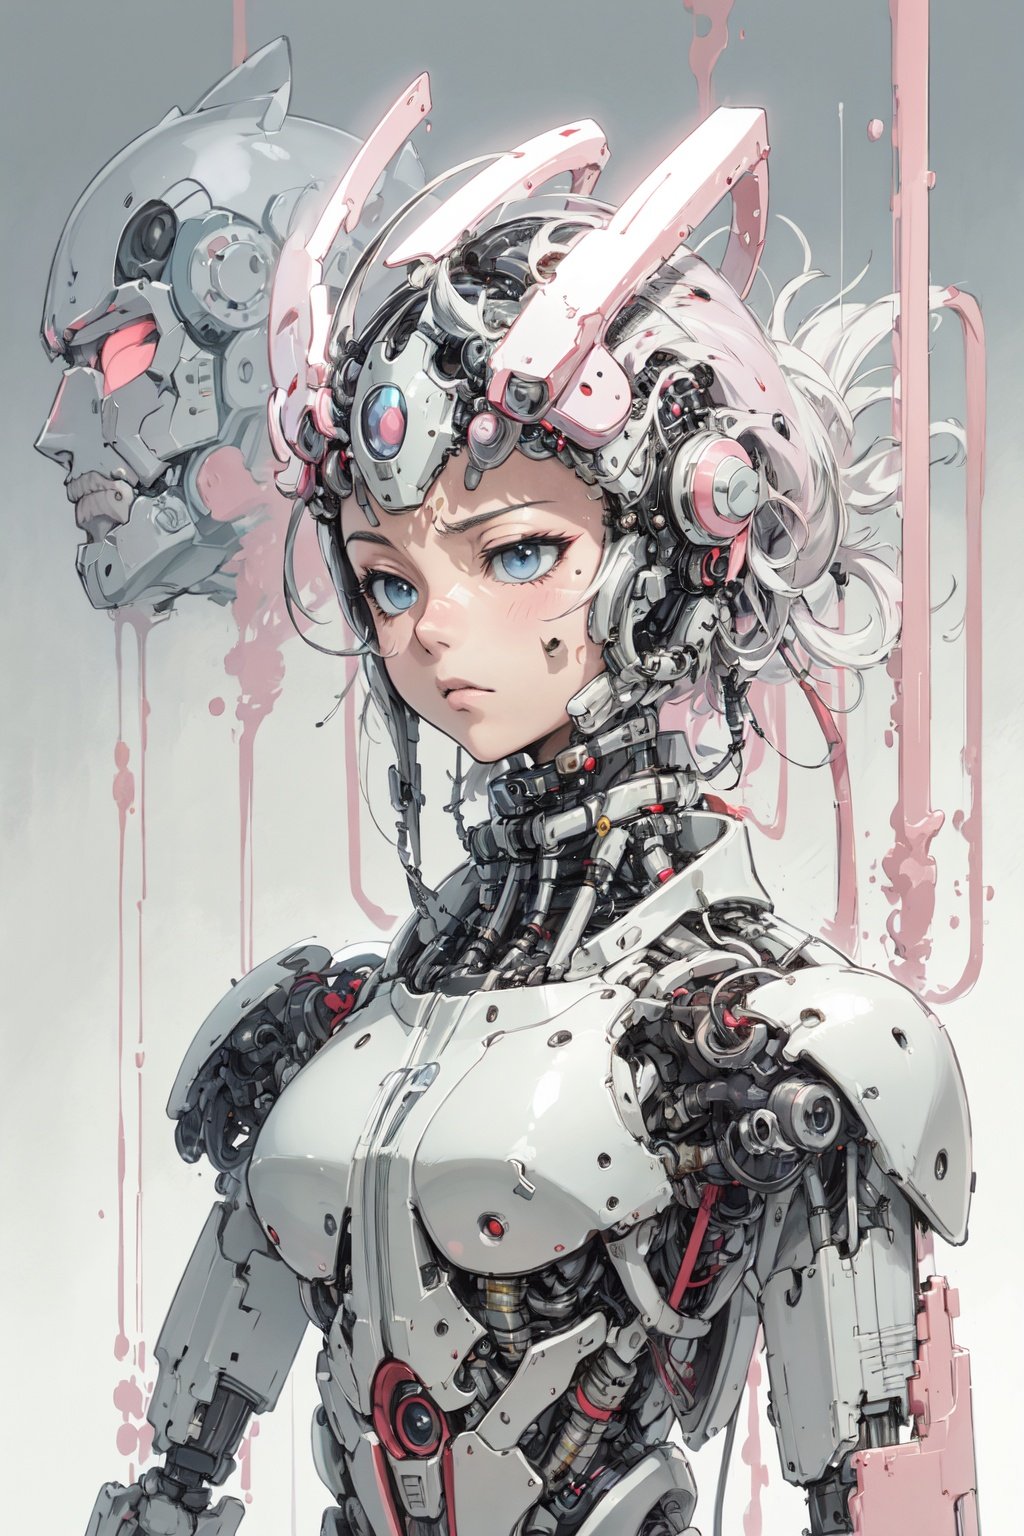 The transformation of Manga into Photographic, cybernetic robot, pastel colors, in the style of Tsutomu Nihei, minimalism